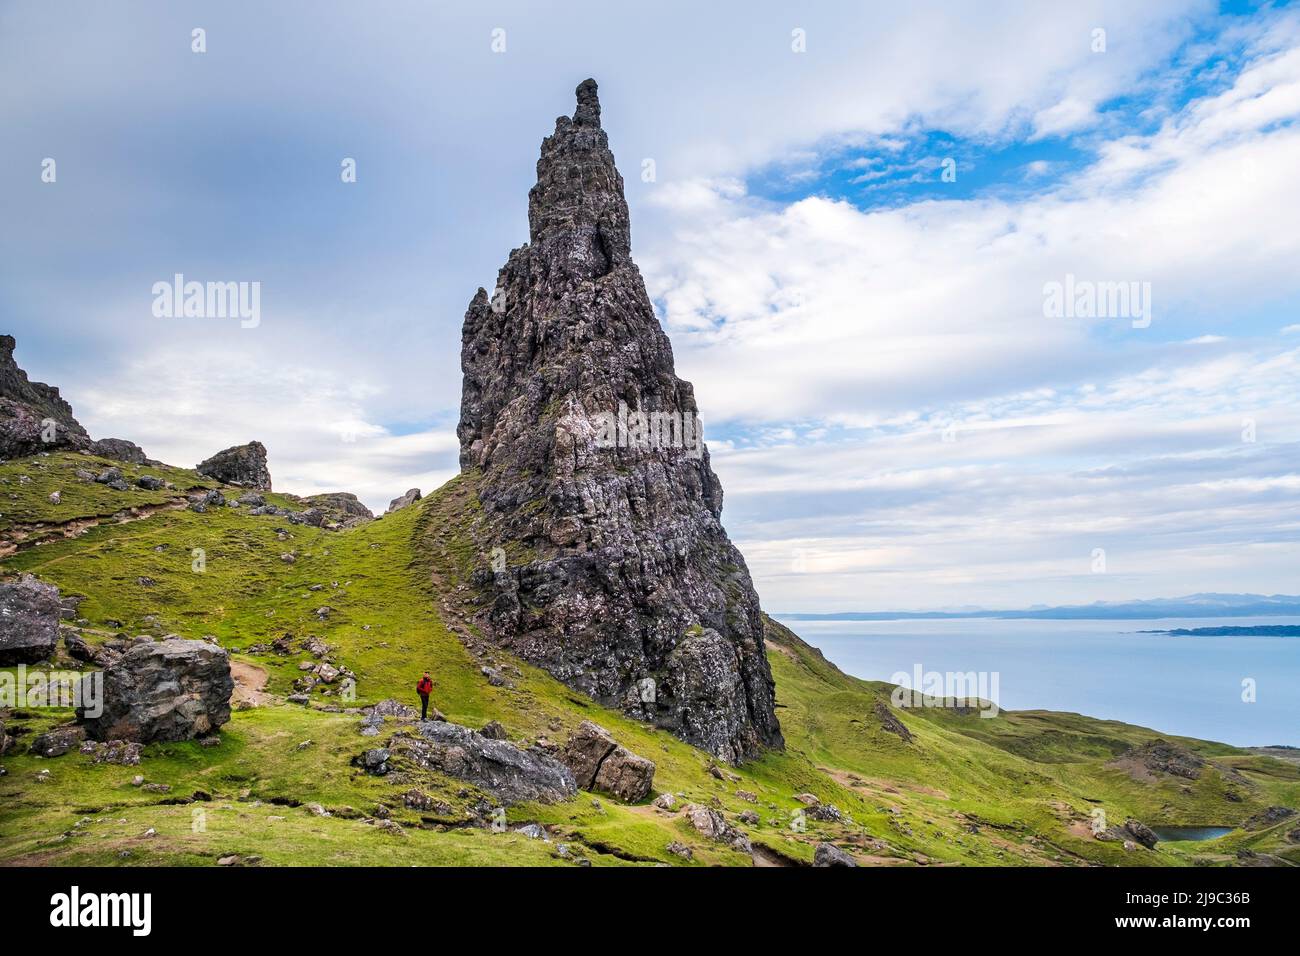 This majestic dramatic rock formation points high into the sky. Stock Photo